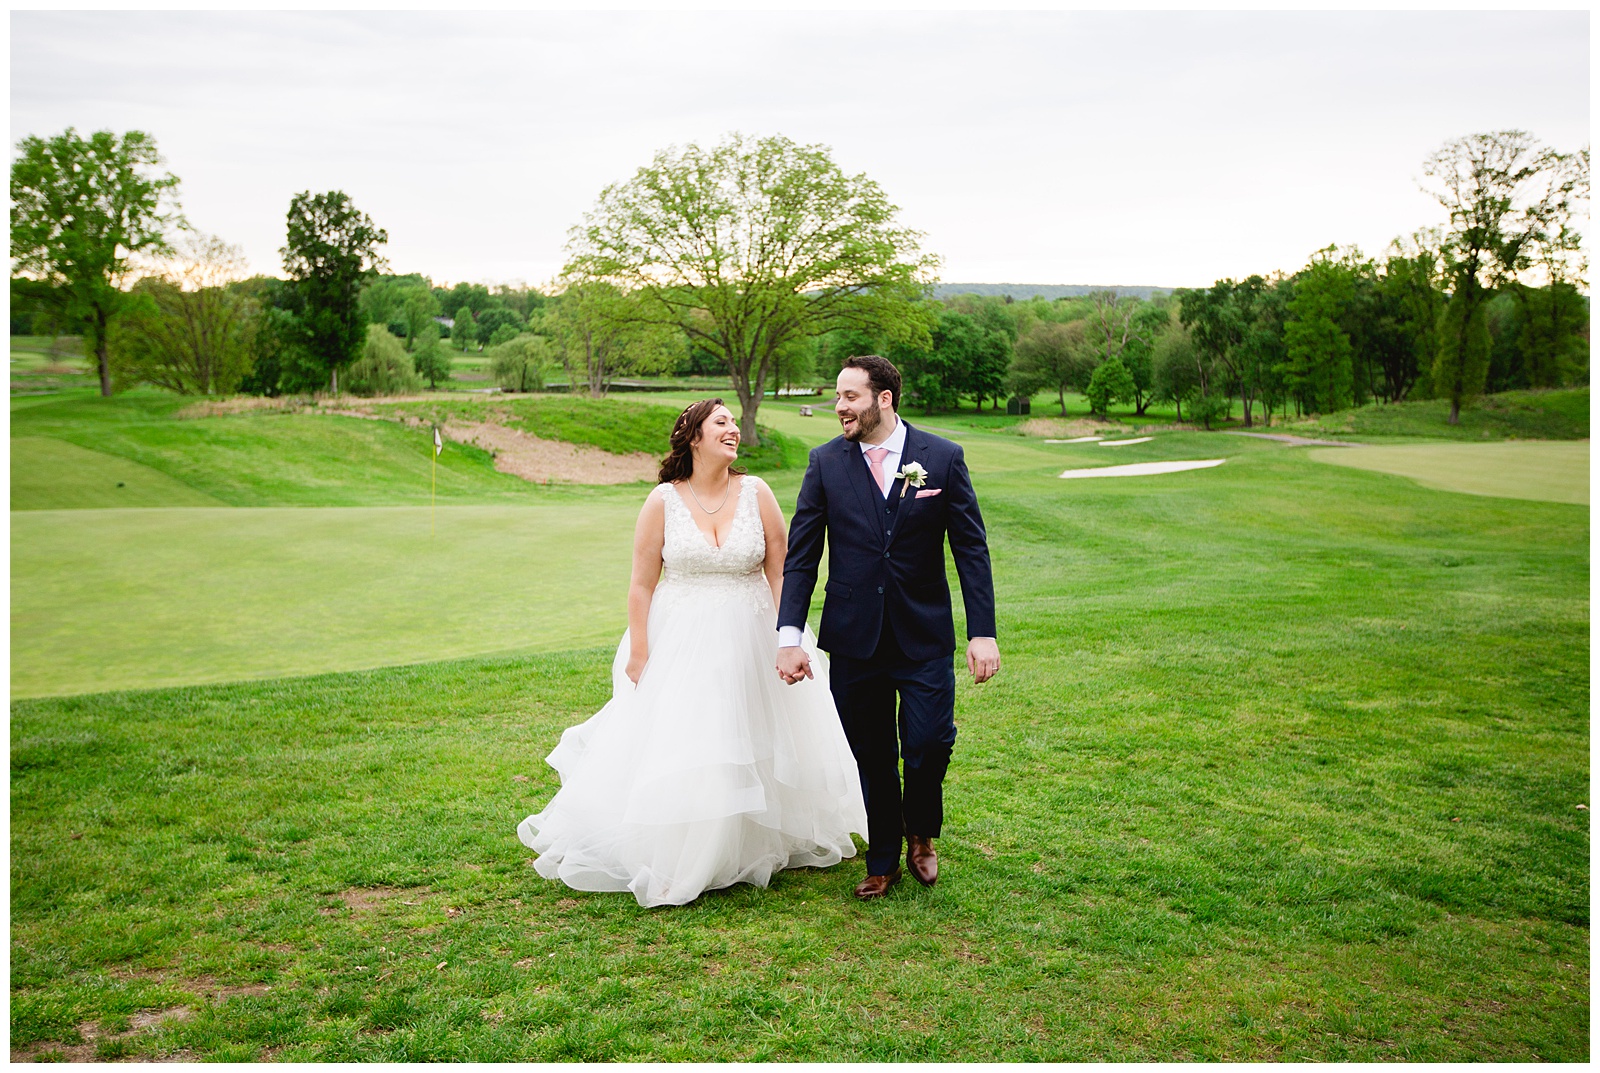 galloping hill country club galloping hill wedding galloping hill wedding photography galloping hill wedding photos galloping hill wedding pics galloping hill wedding photographer jewish wedding outdoor ceremony ketubah signing kenilworth new jersey